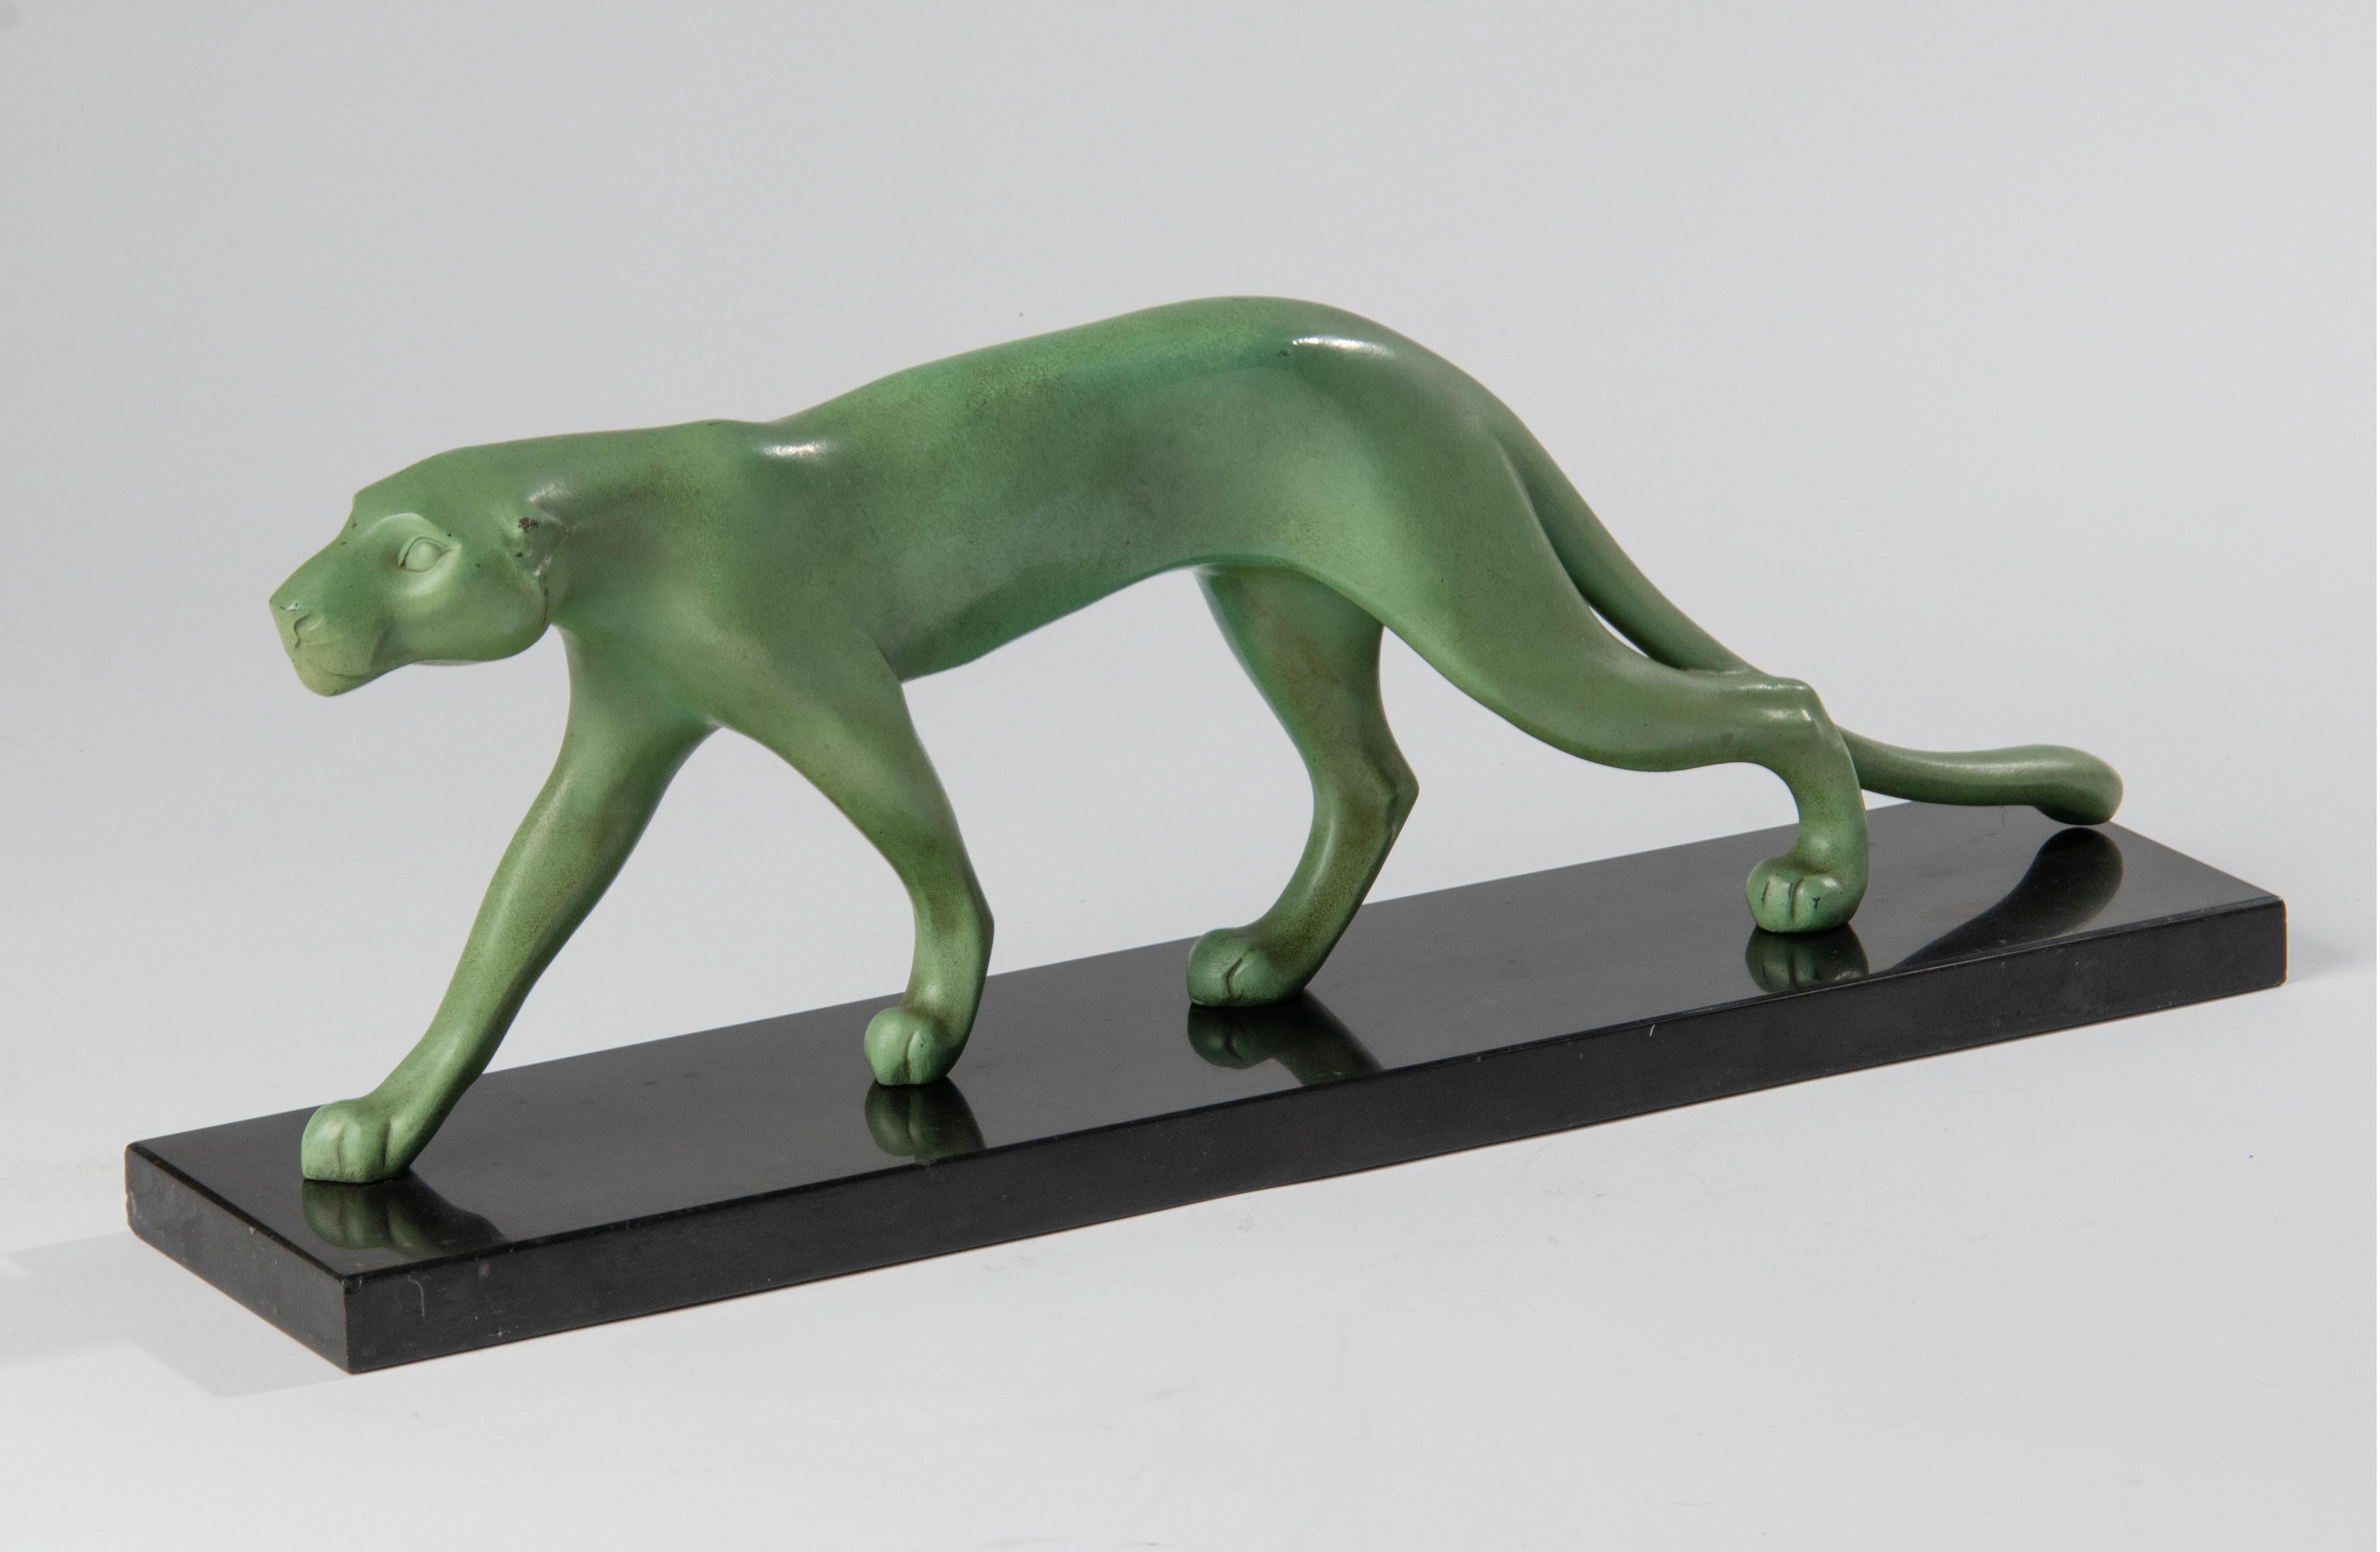 A beautiful stylized Art Deco sculpture of a cougar, made of green patinated spelter. On a black Belgian marble plinth. Made in France or Belgium around 1910-1930. It has no signature.
Dimensions: 17 (h) x 45 x 10 cm. Some wear on the patina at the